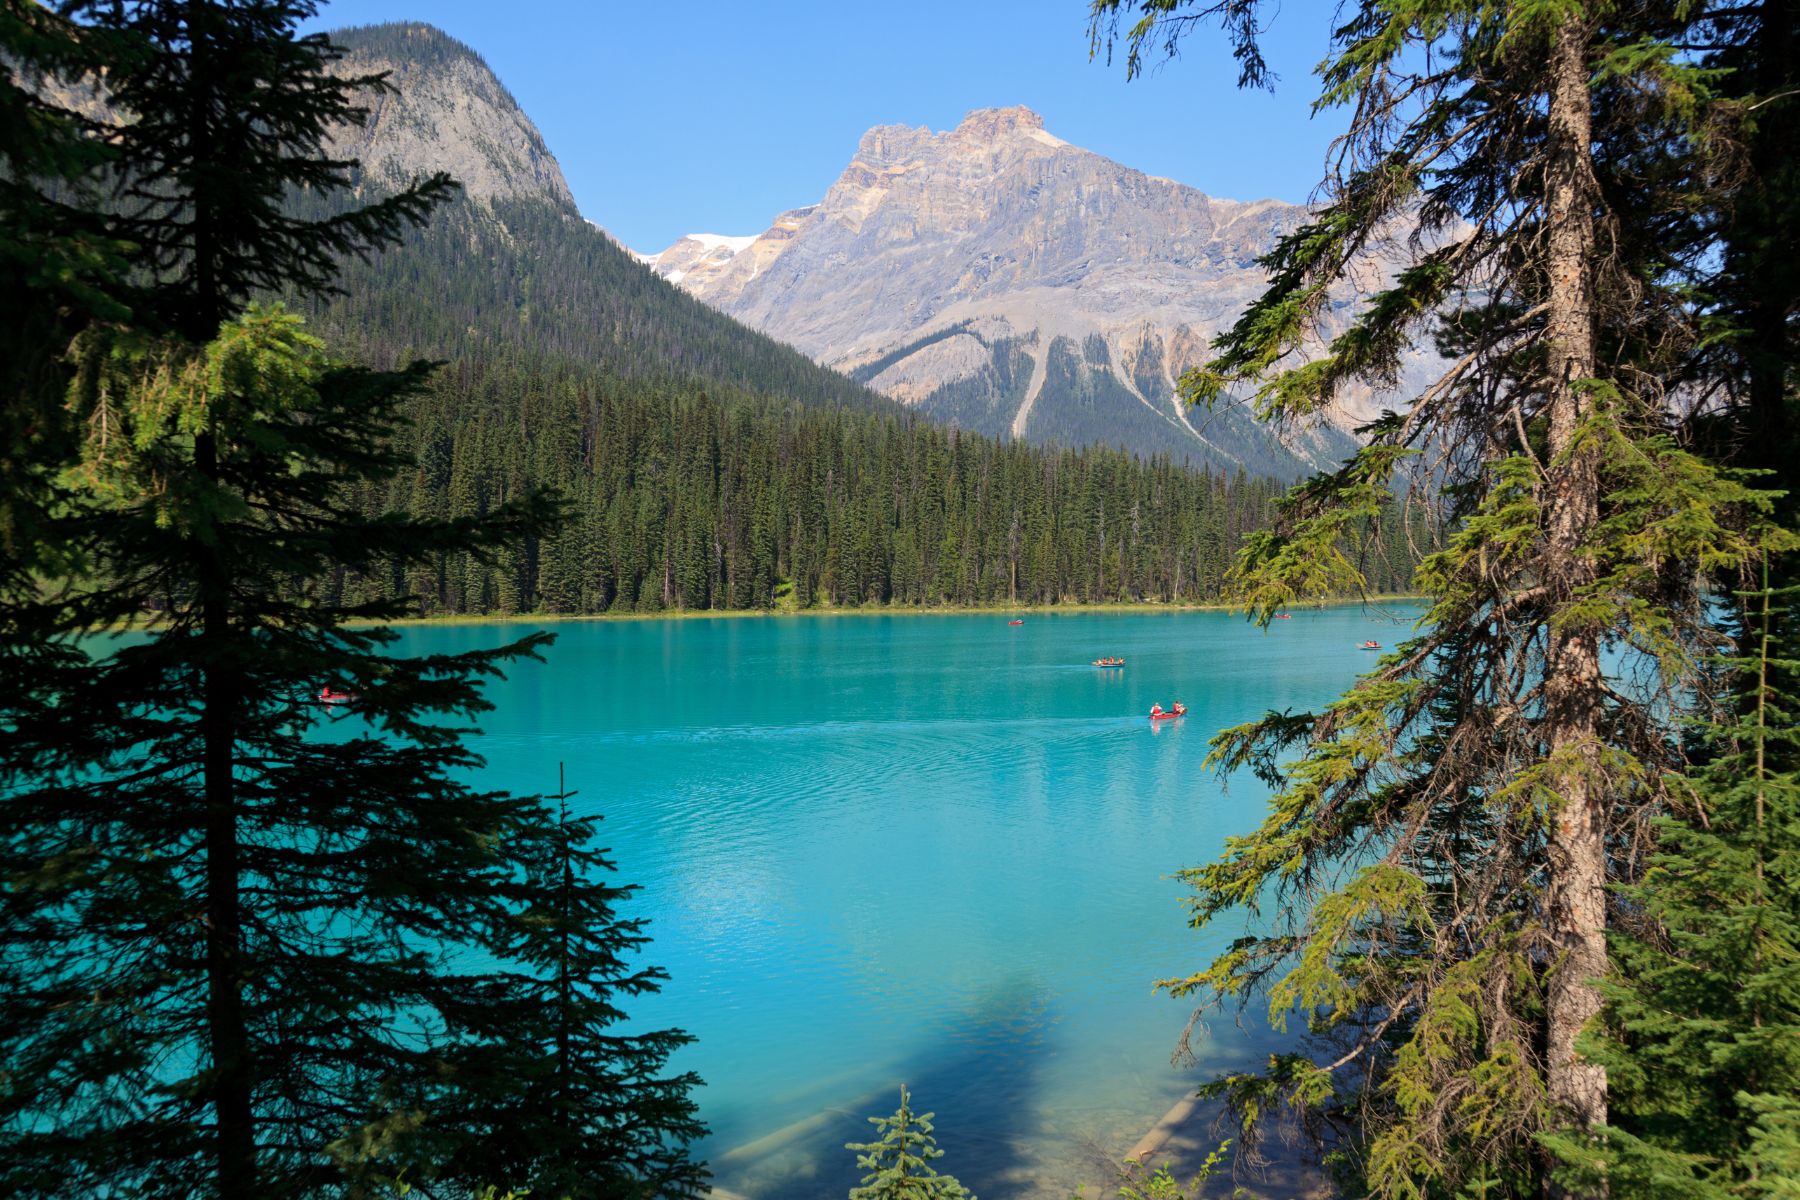 A Landscape Of Emerald Lake With Canoes